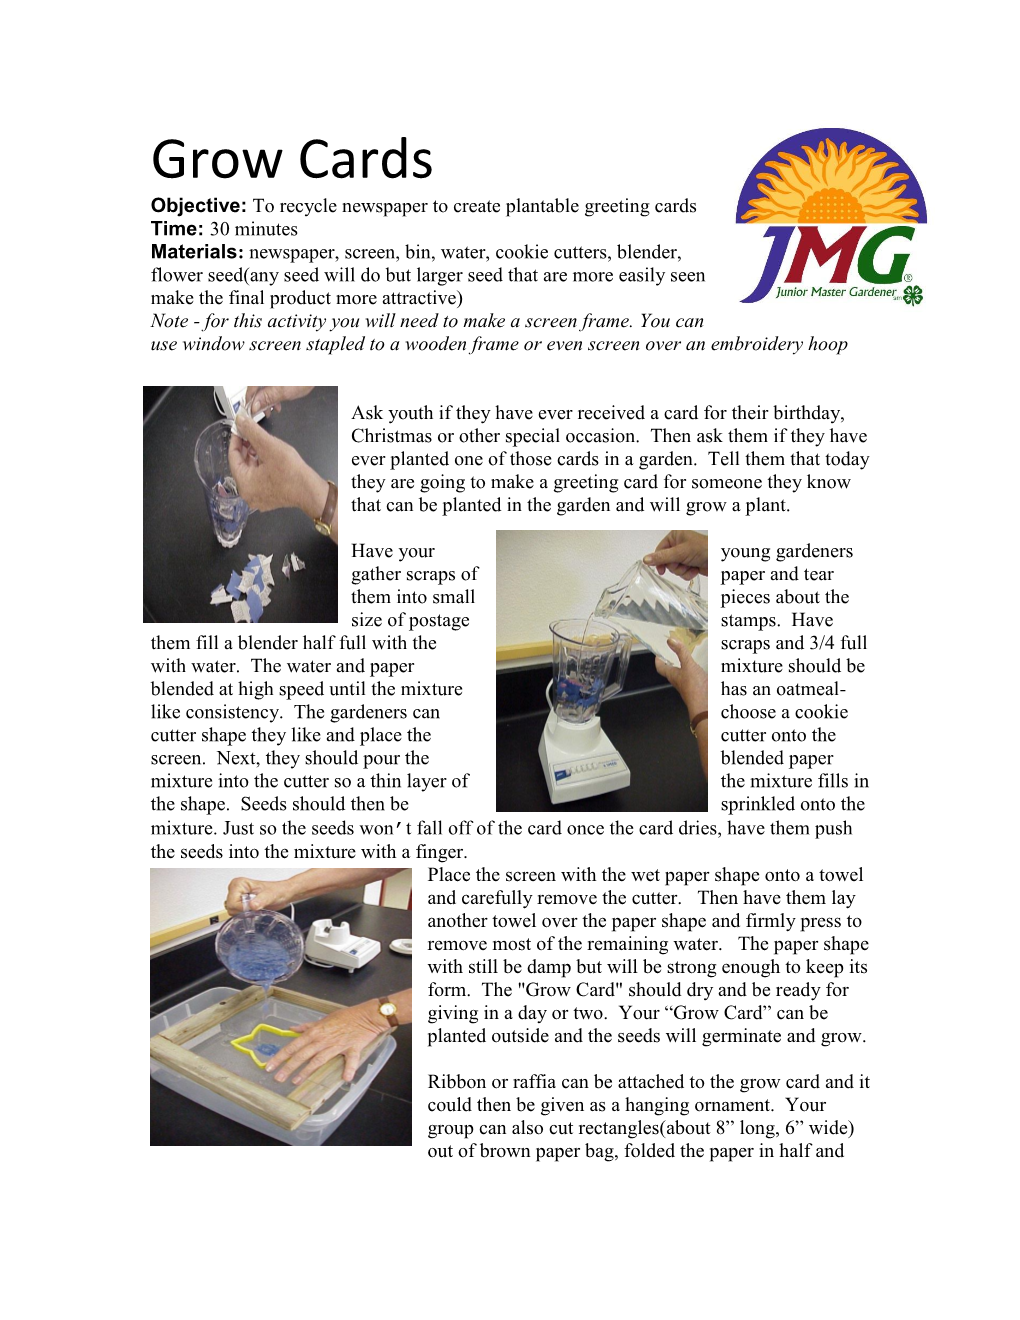 Grow Cards Lesson